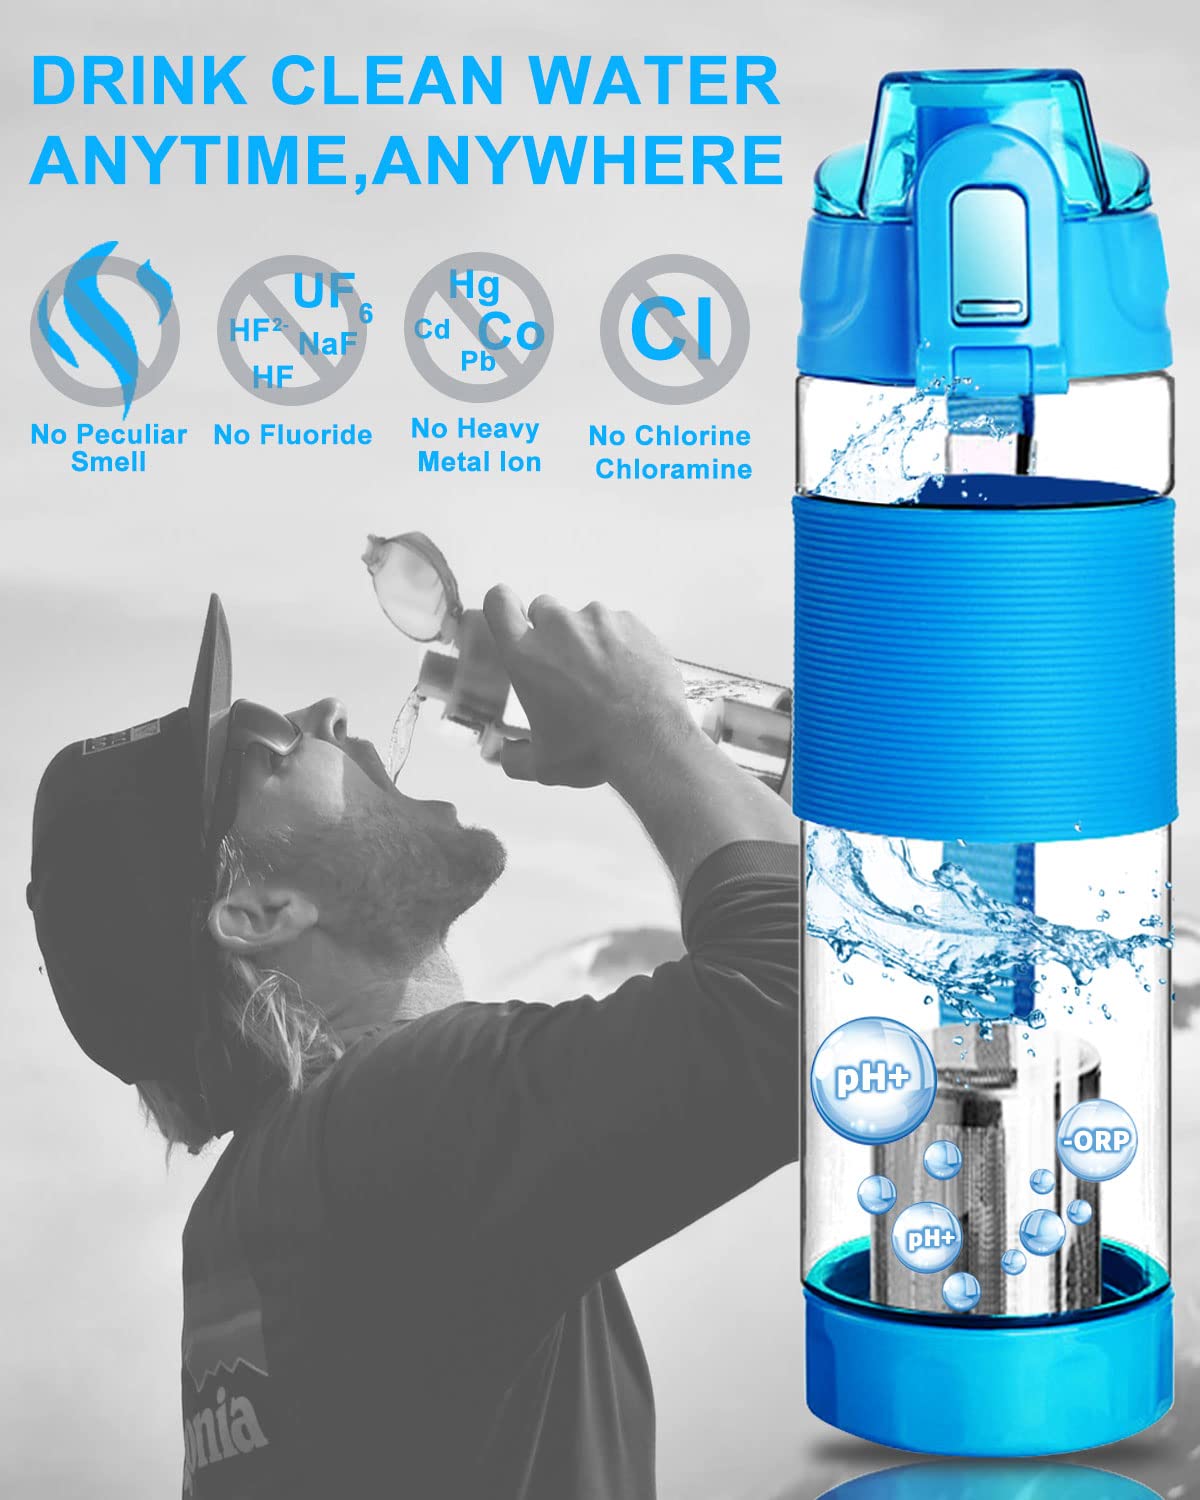 Filterelated Alkaline Water Bottle Replacement Filter Cartridge for Filterelated 6501 Alkaline Water Cup